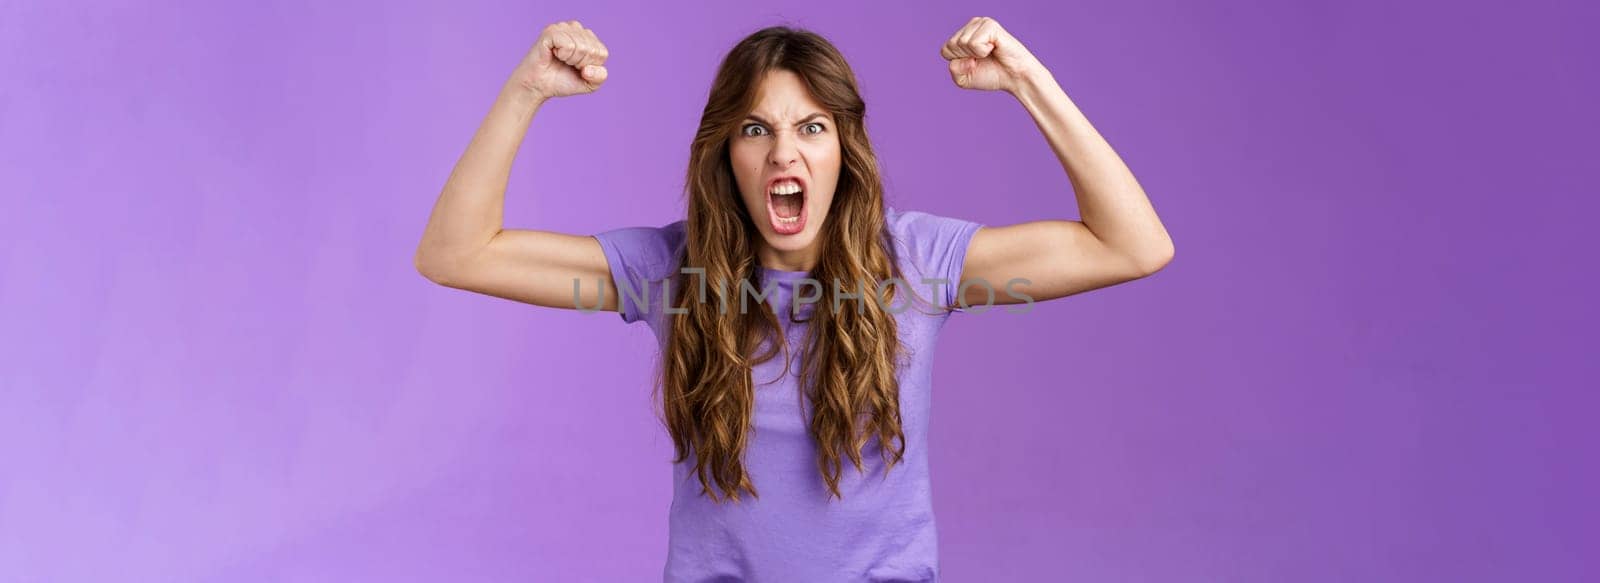 Funny curly-haired girl raising hands fist pump show muscles yelling daring cool shouting encouraged motivated win grimacing strong powerful woman celebrating victory feel like champion. Lifestyle.